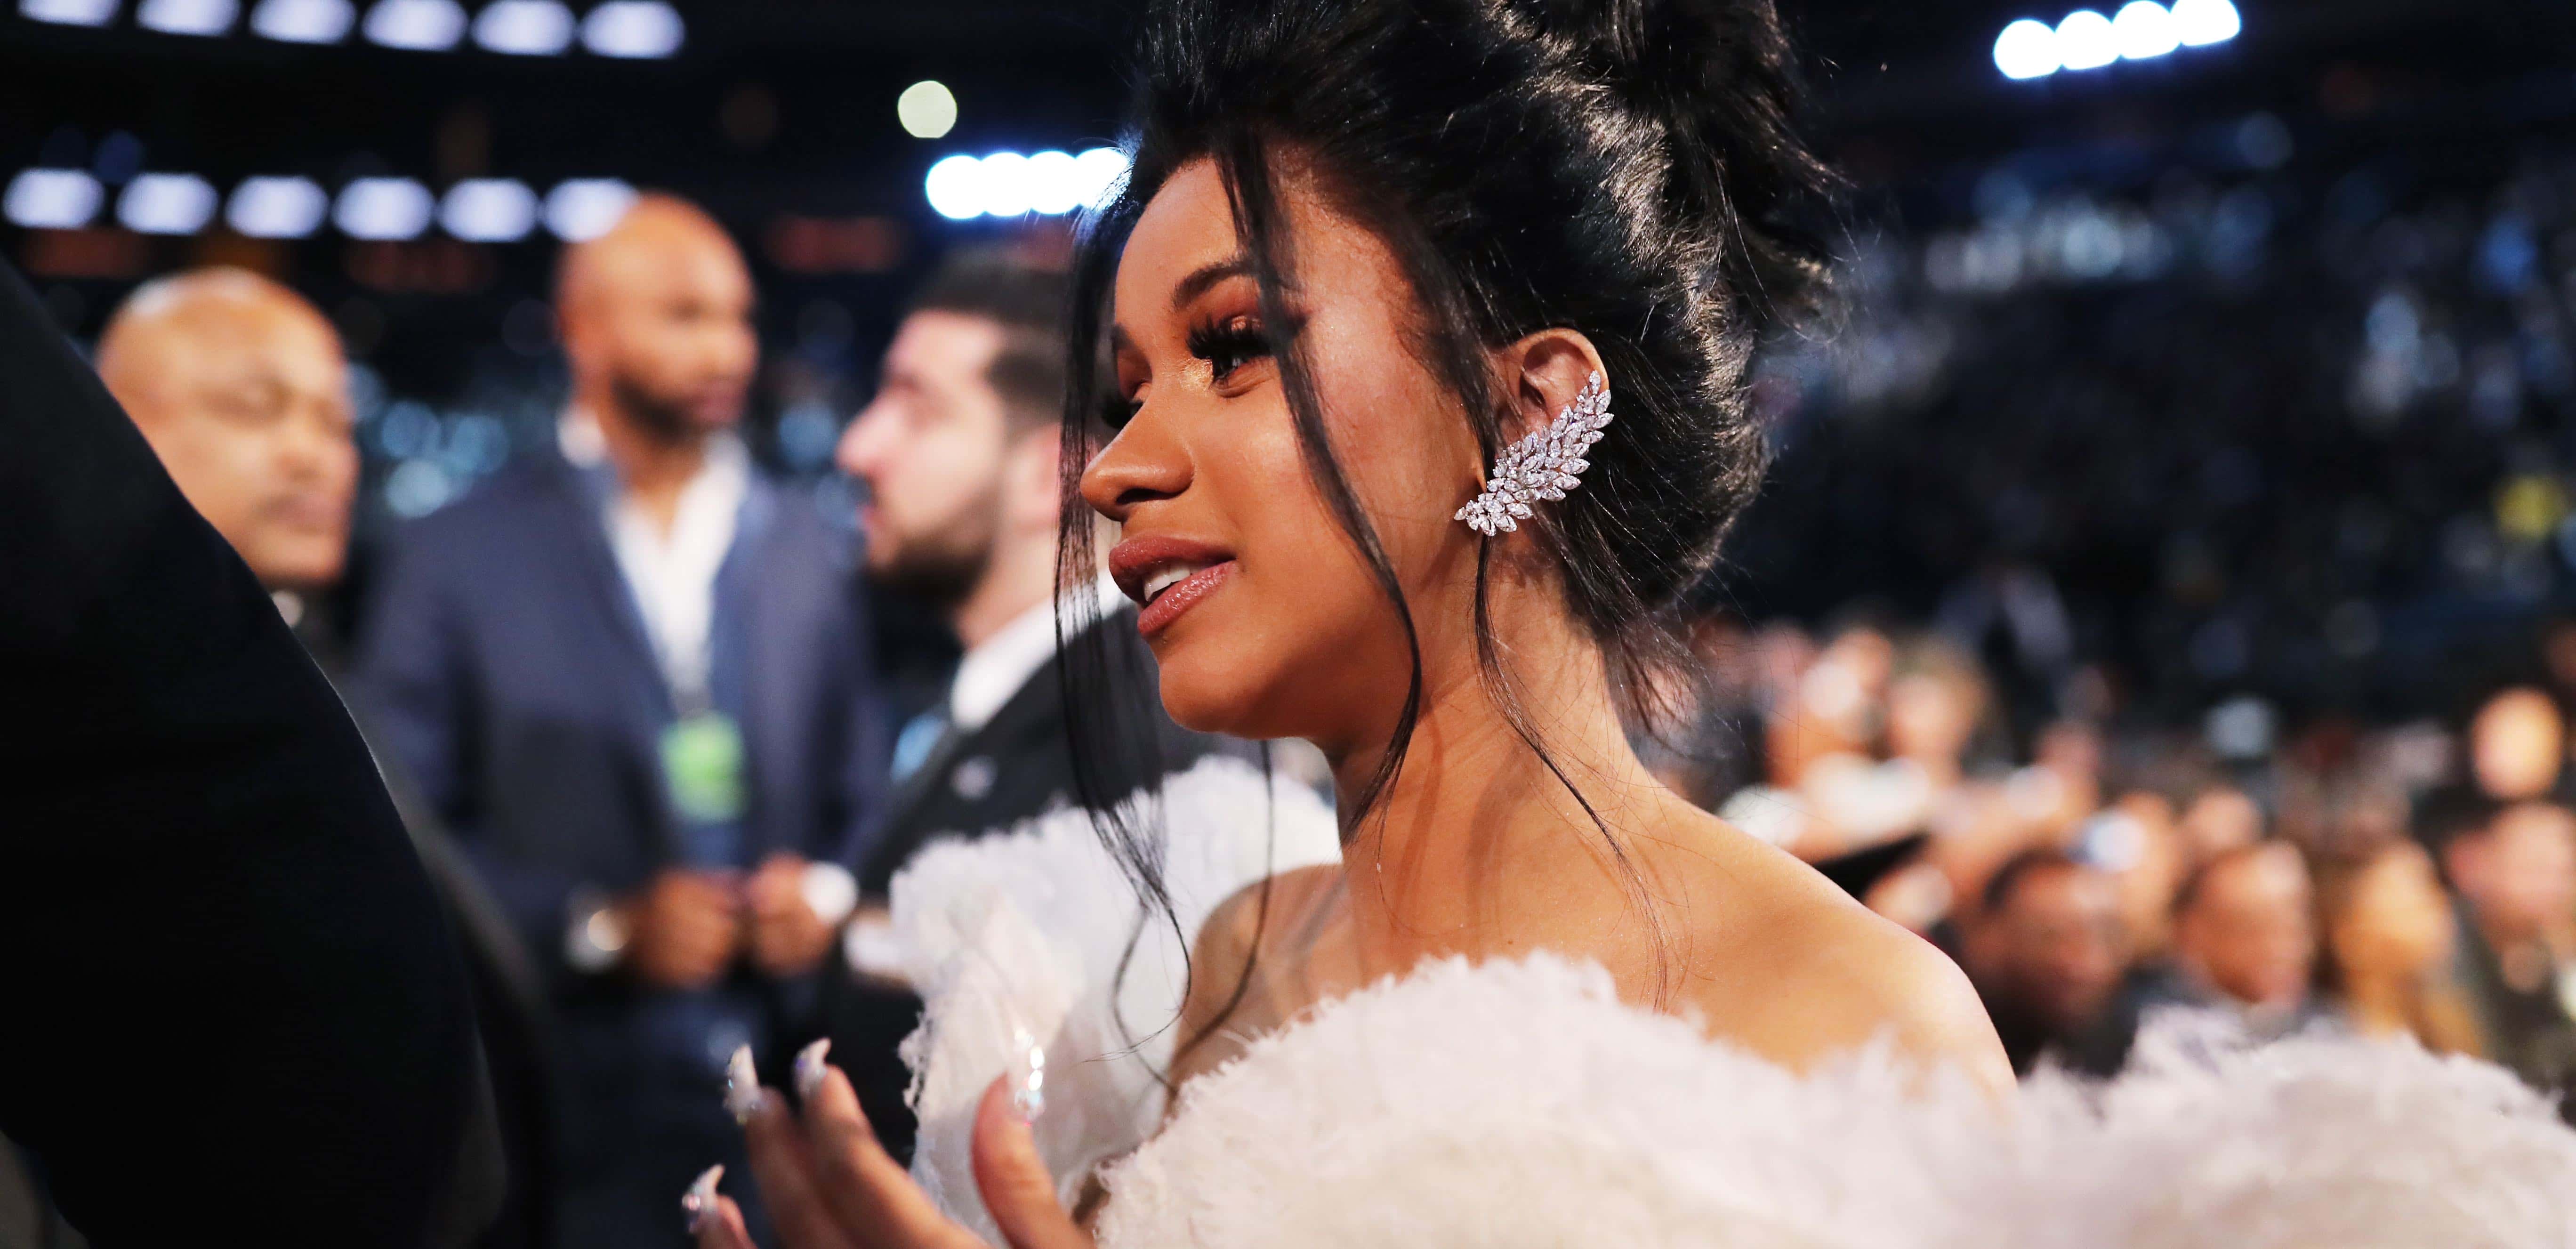 The 11 Best Bartier Cardi Gifs For All Your Tweeting Occasions